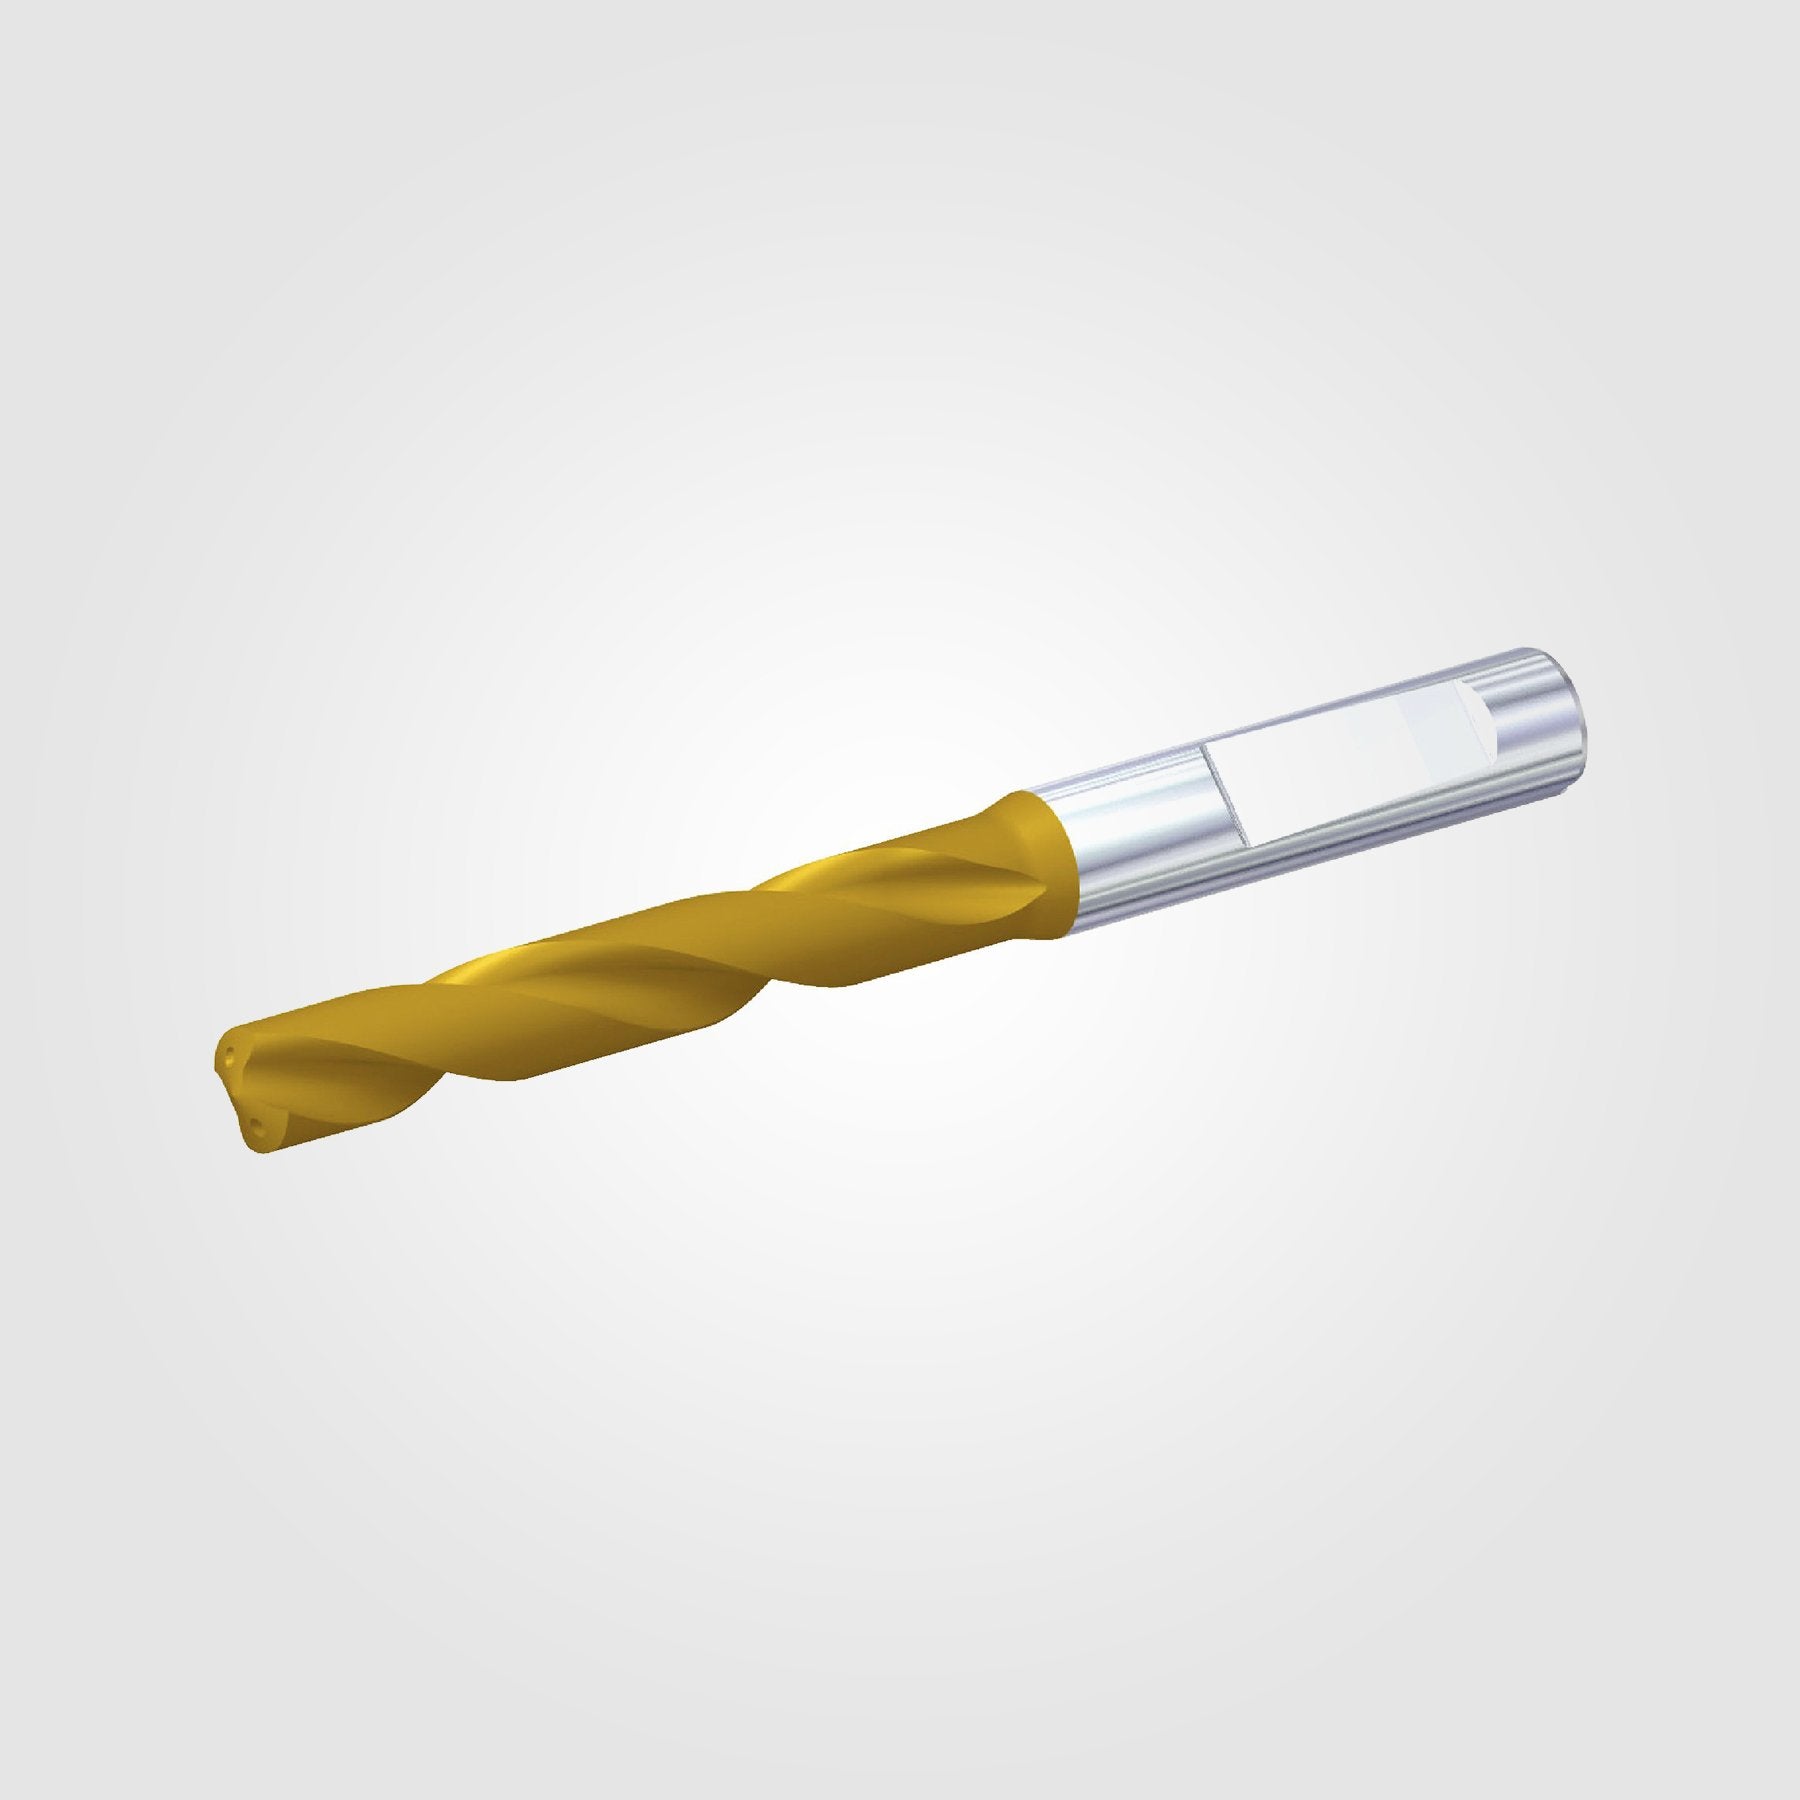 GOdrill (THROUGH COOLANT) | 12.7mm / .5000" / 3xD | SOLID CARBIDE DRILL | 4149032